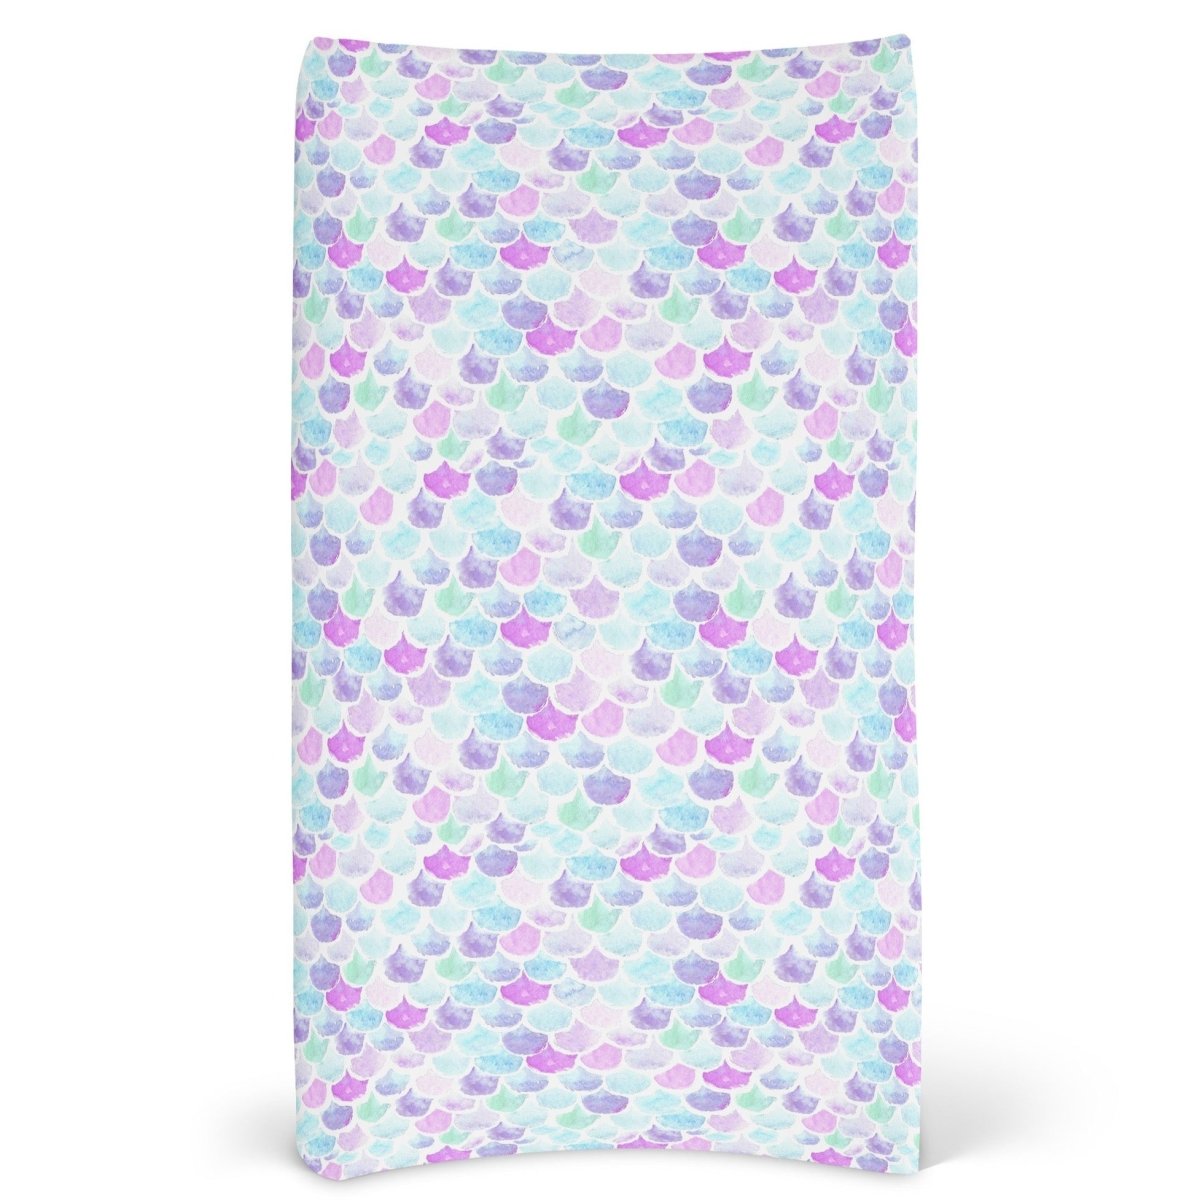 Jewel Mermaids Scales Changing Pad Cover